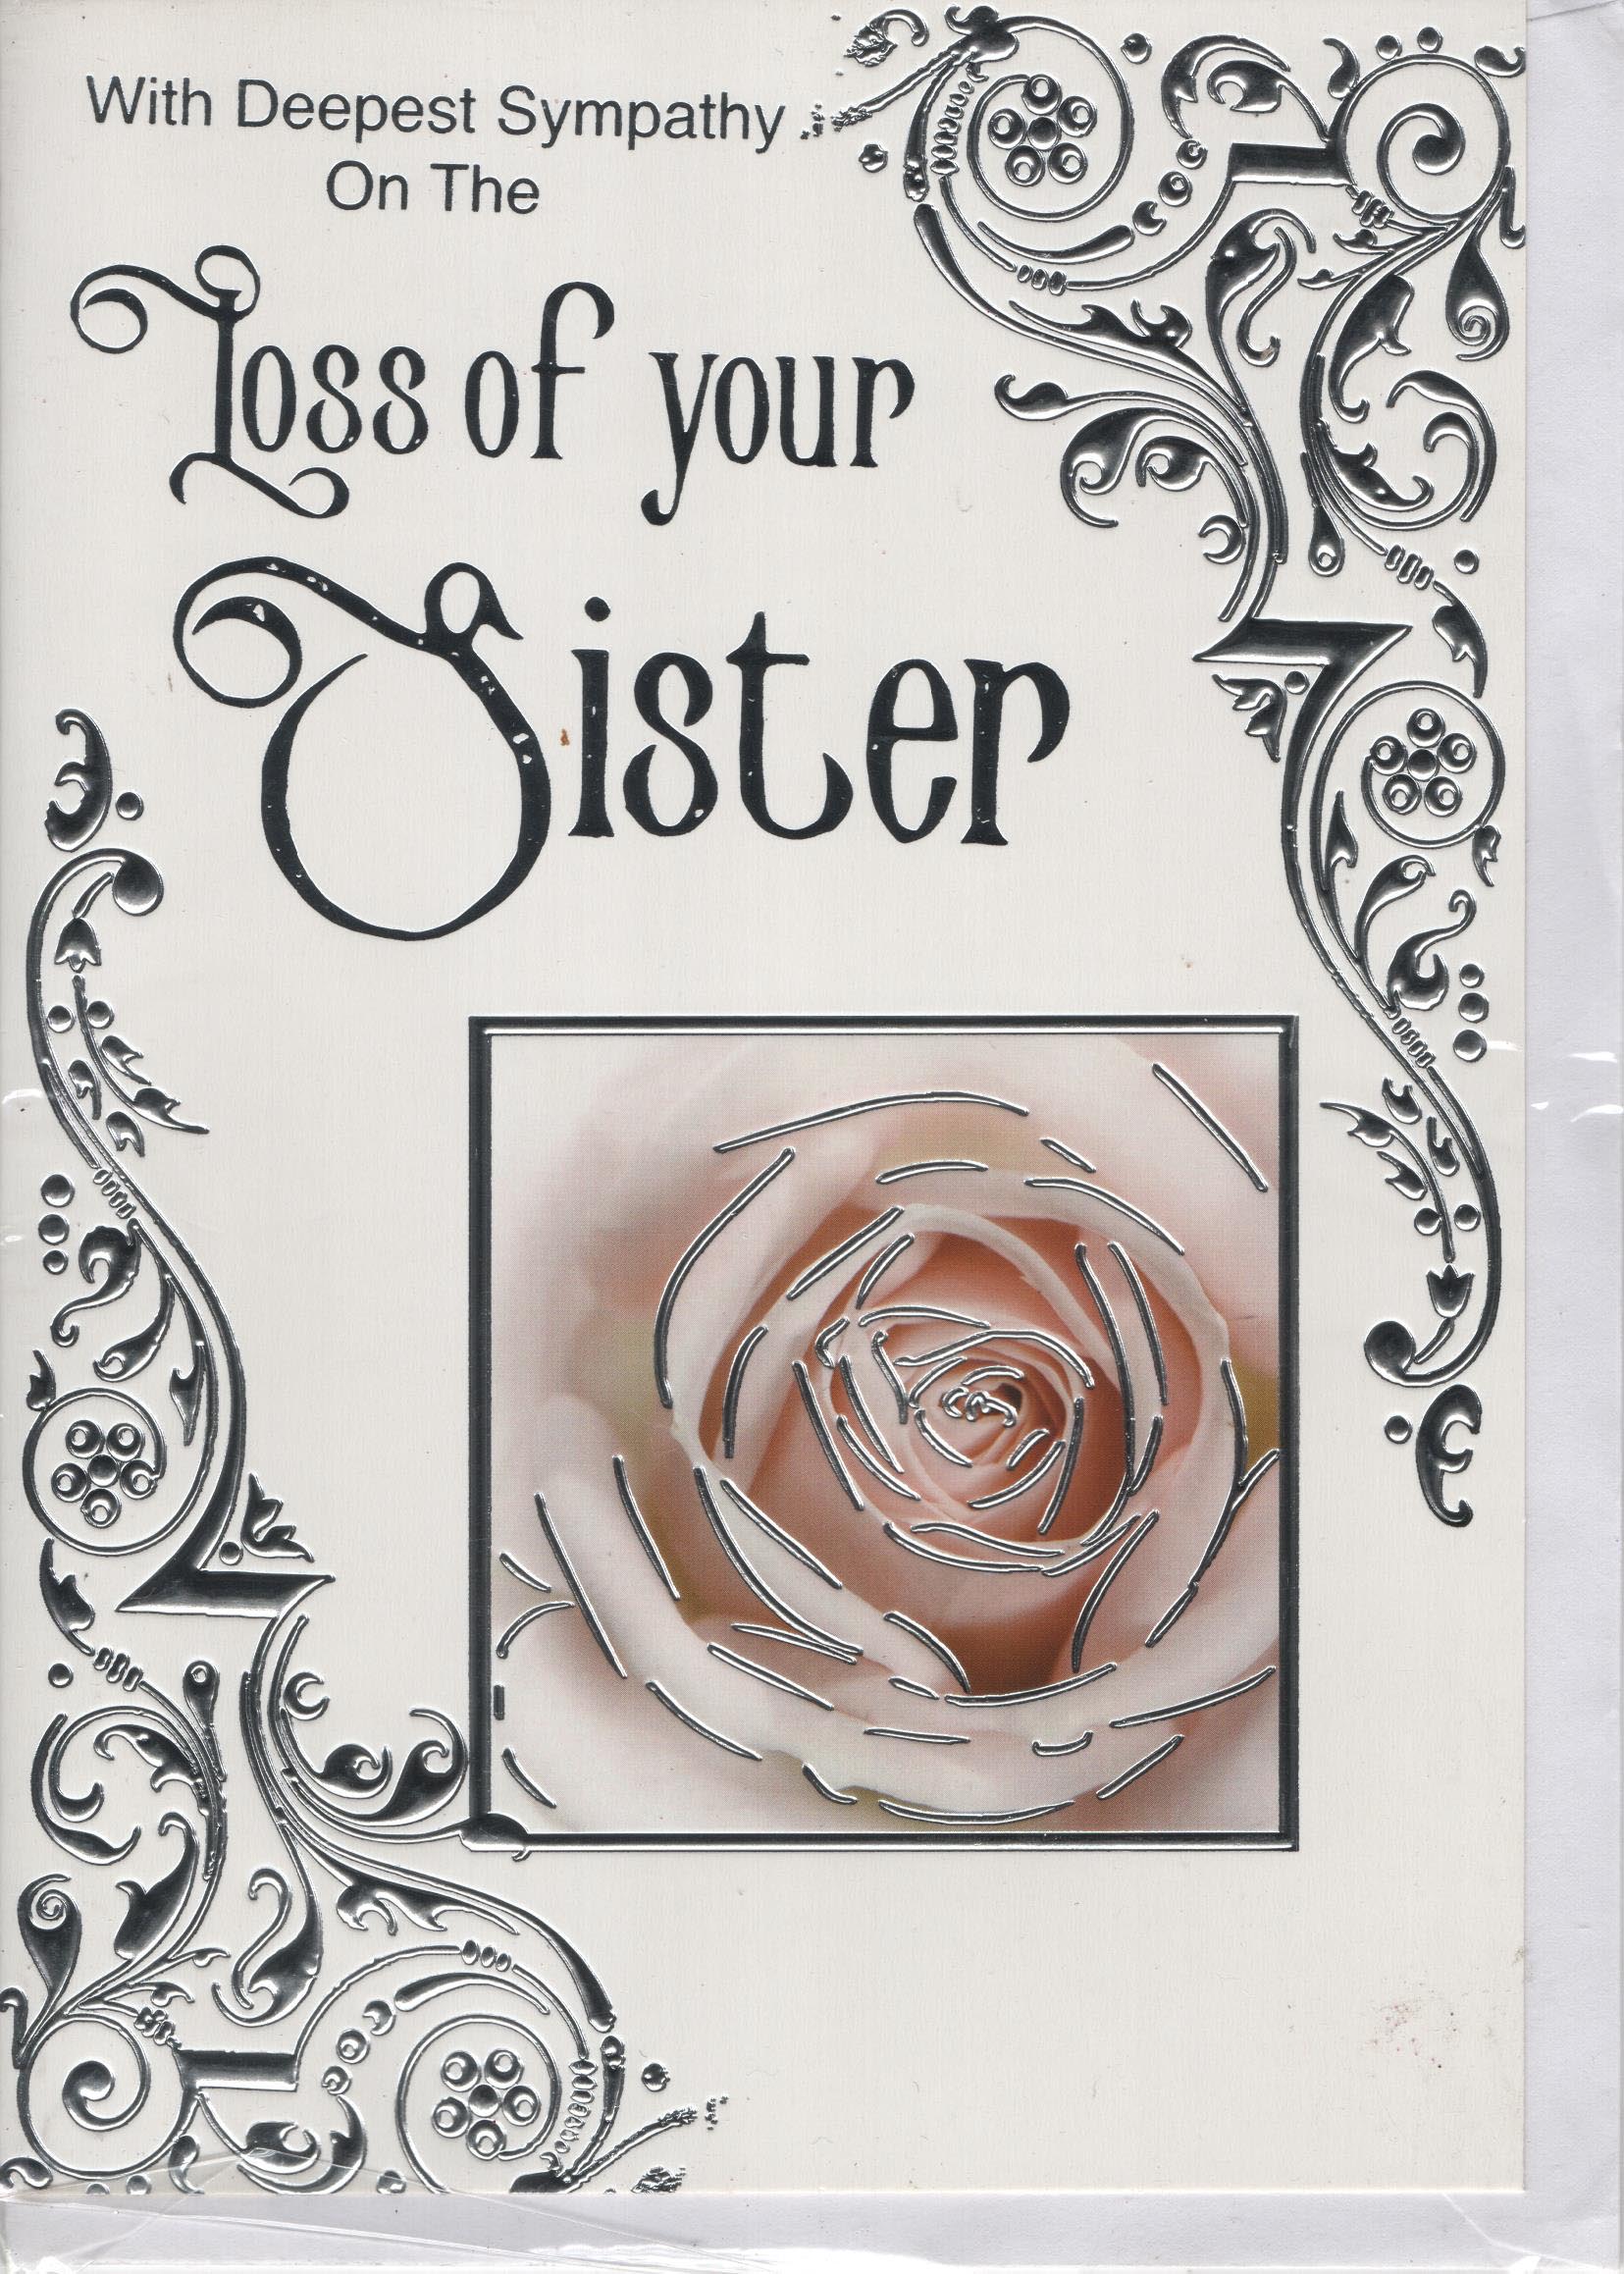 With Deepest Sympathy on The Loss of Your Sister Greeting Card